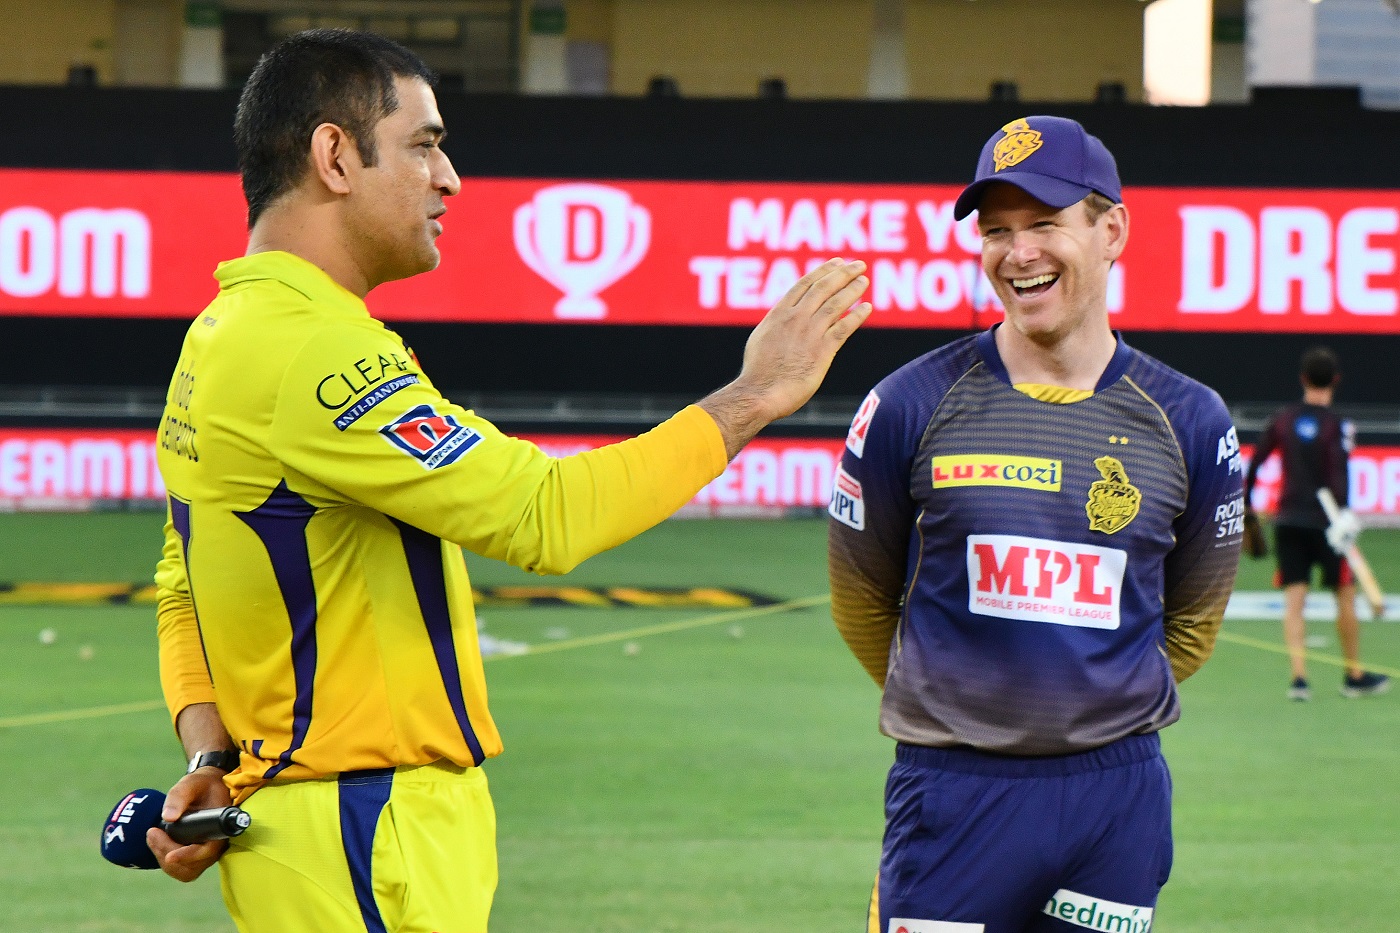 KKR vs CSK, IPL 2021 - Where and when to watch KKR vs CSK live match at 7.30 PM IST on April 21, 2021